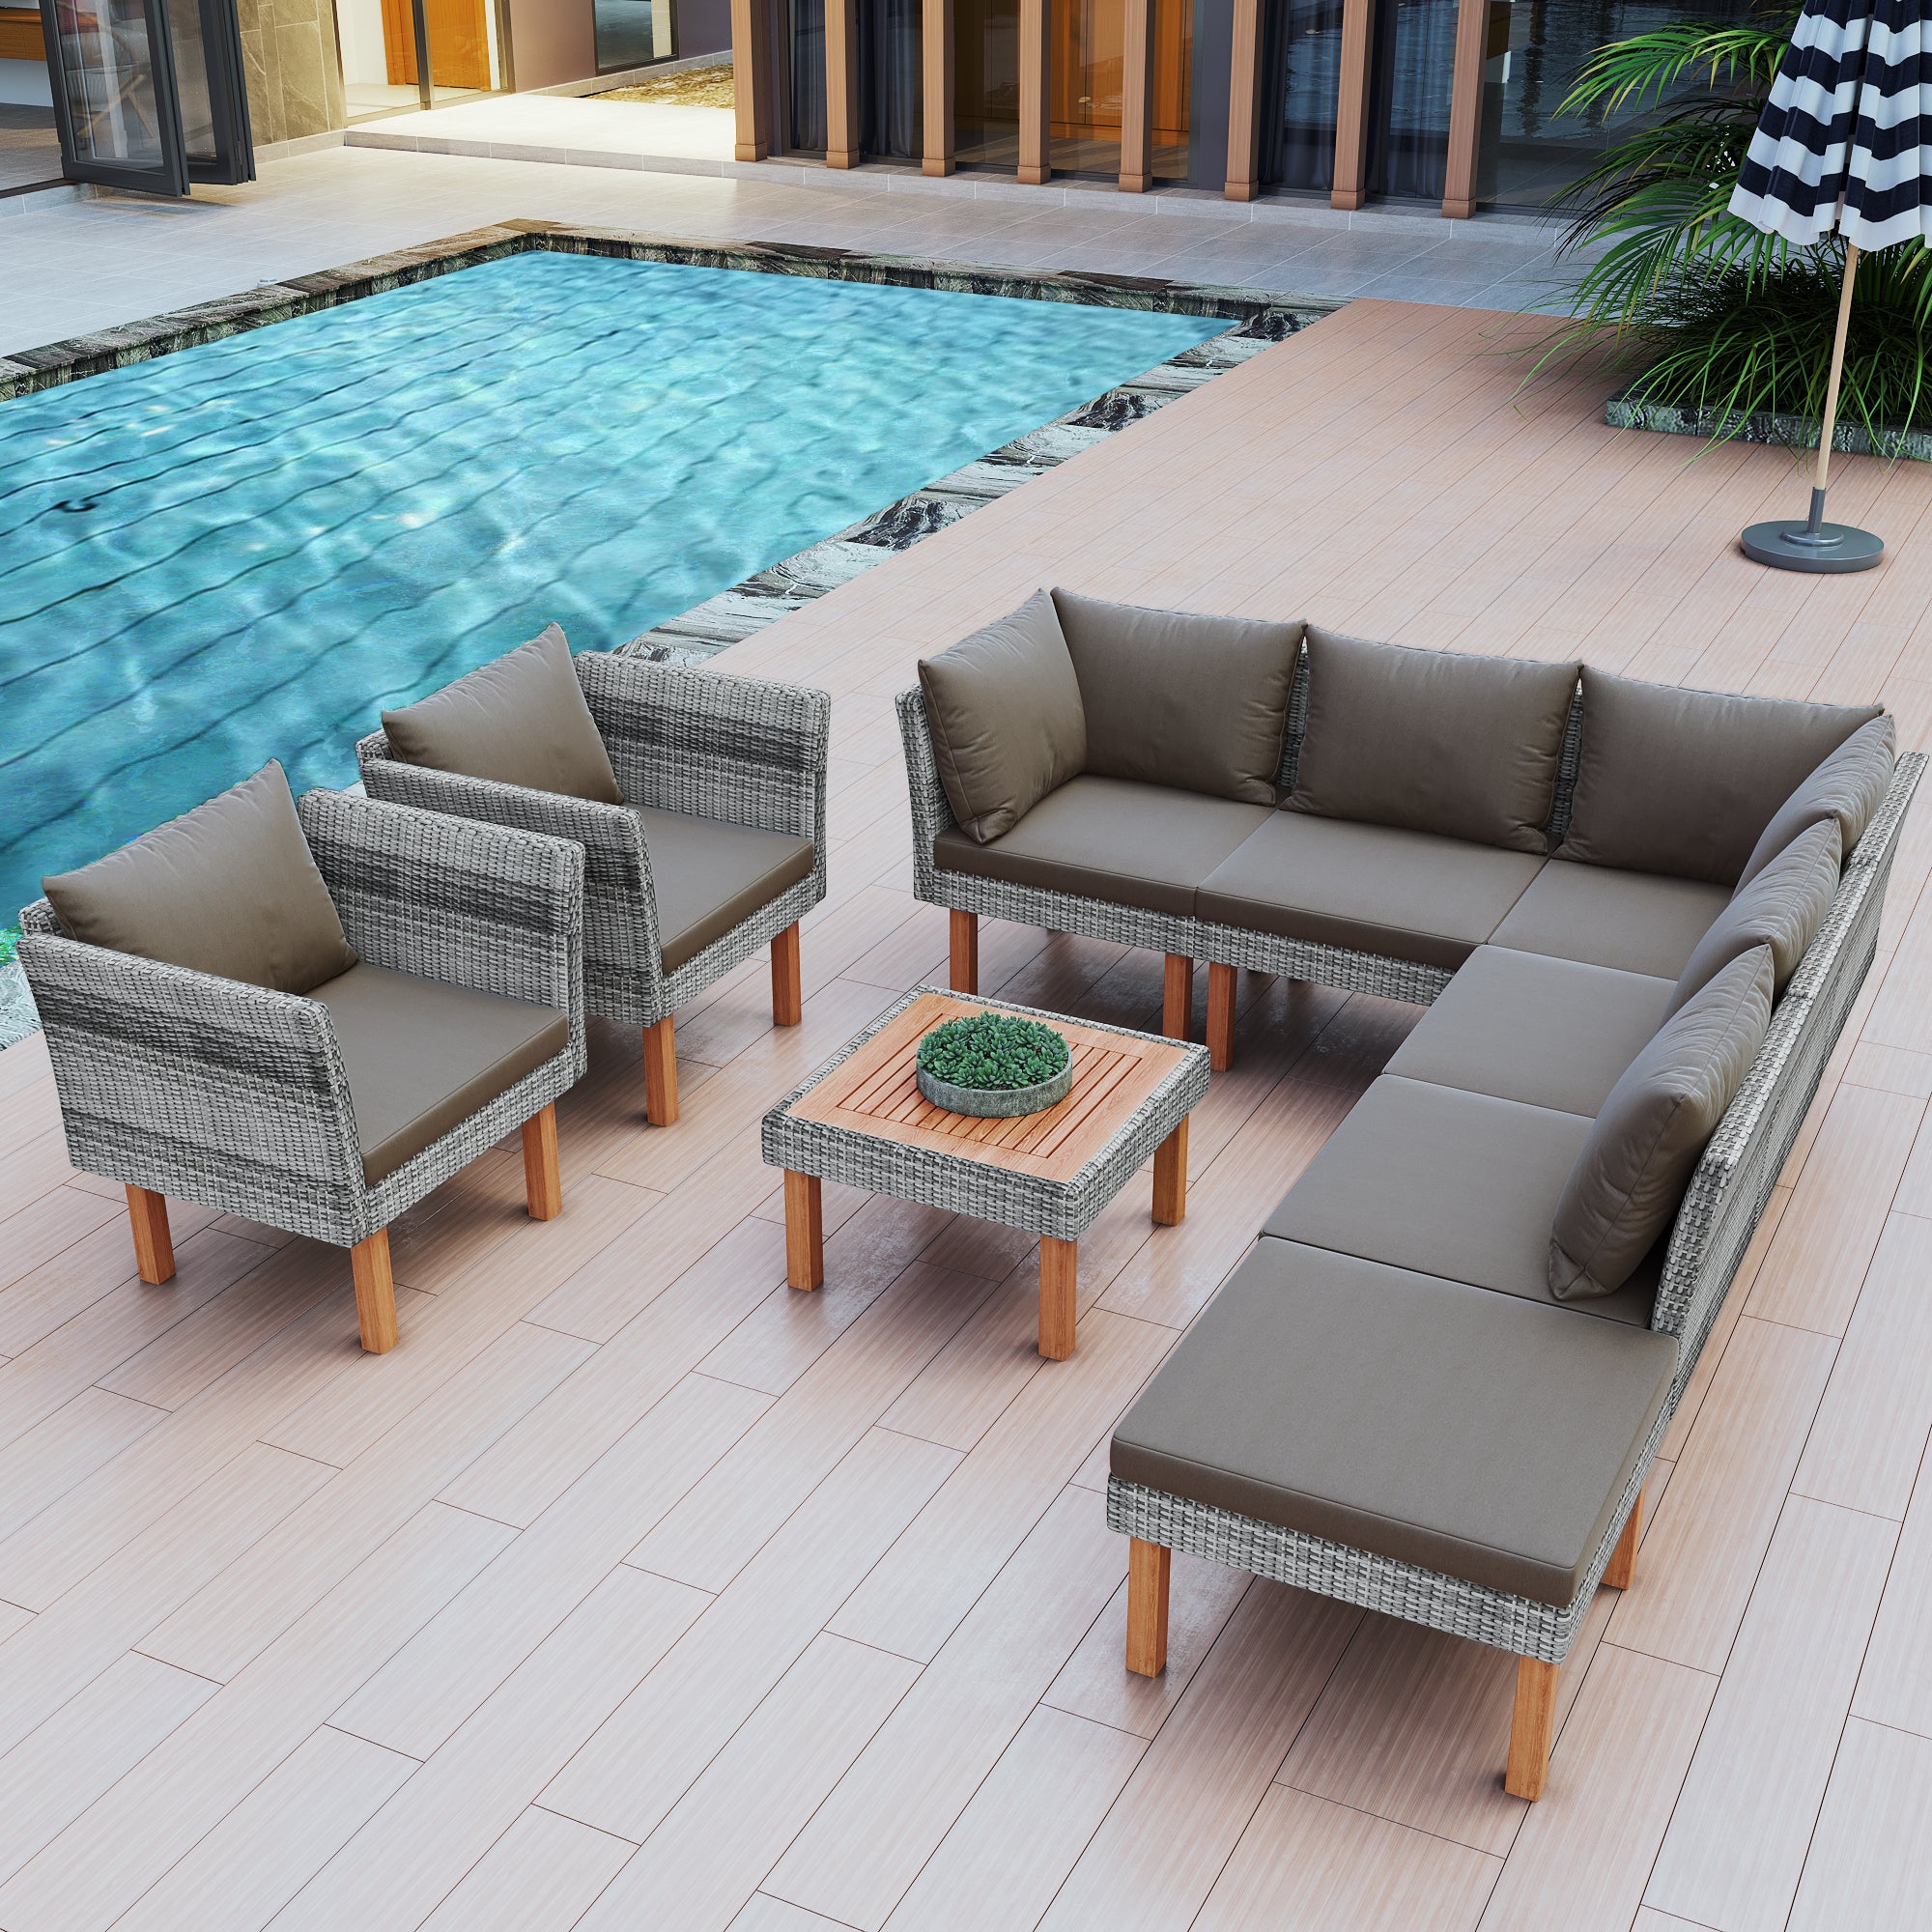 9-Piece Outdoor Gray PE Rattan Sofa Set with Wood Legs, Acacia Wood Tabletop, Armrest Chairs with Gray Cushions